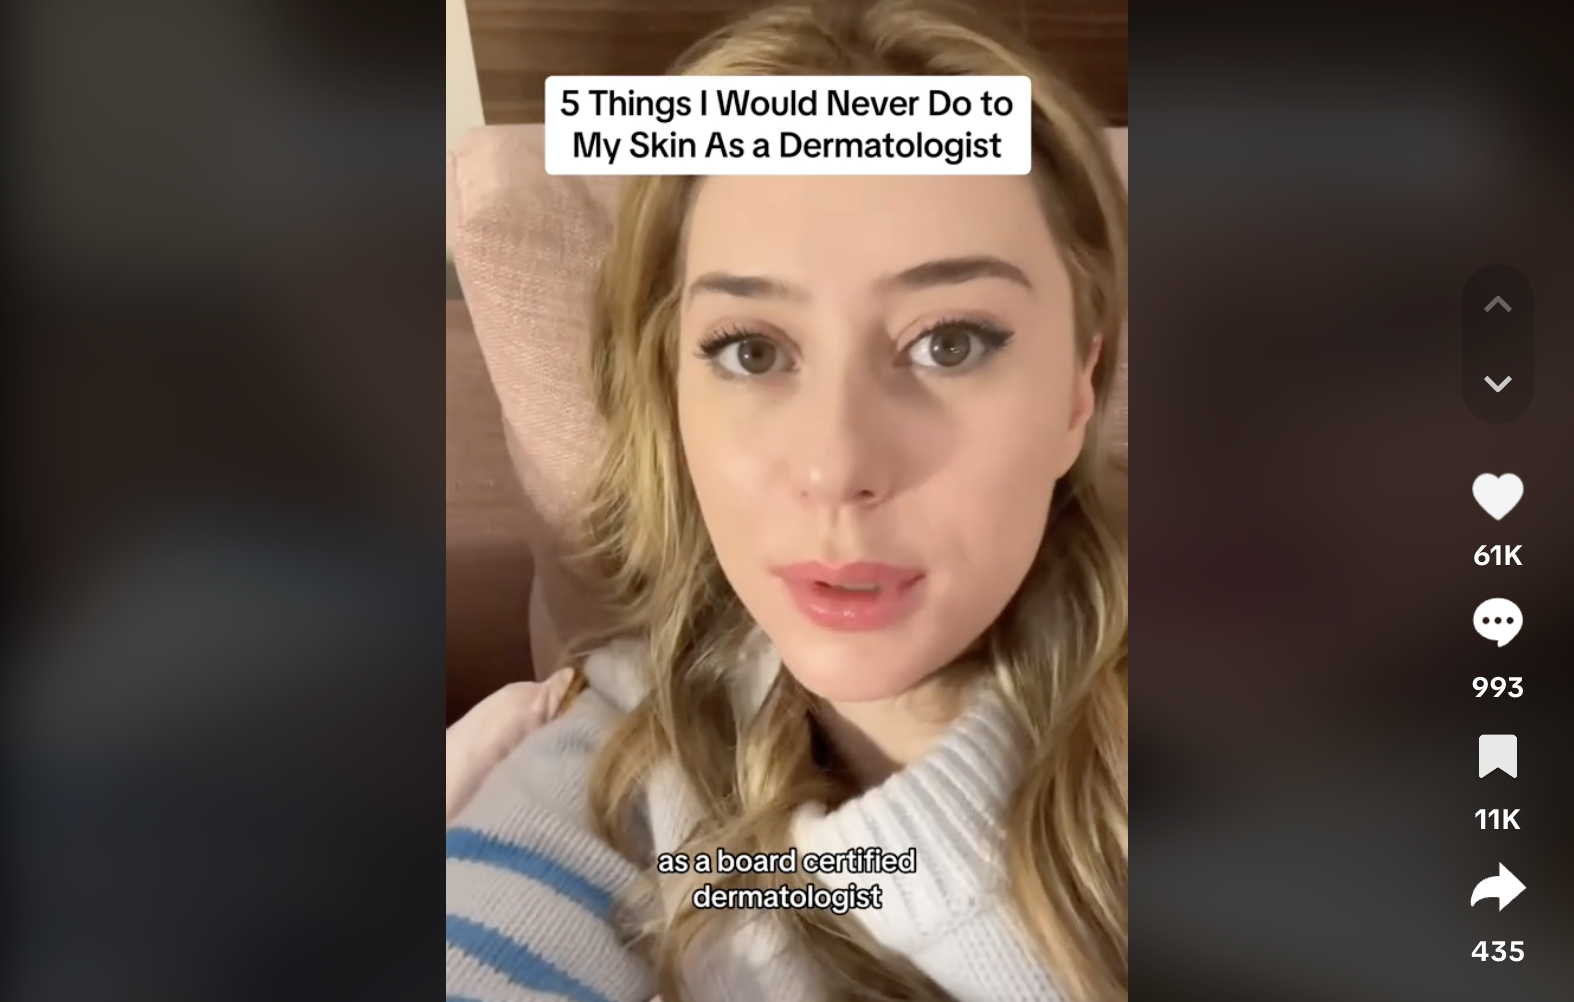 Dermatologist names 5 things she would never do to her face. The TikTok video went viral